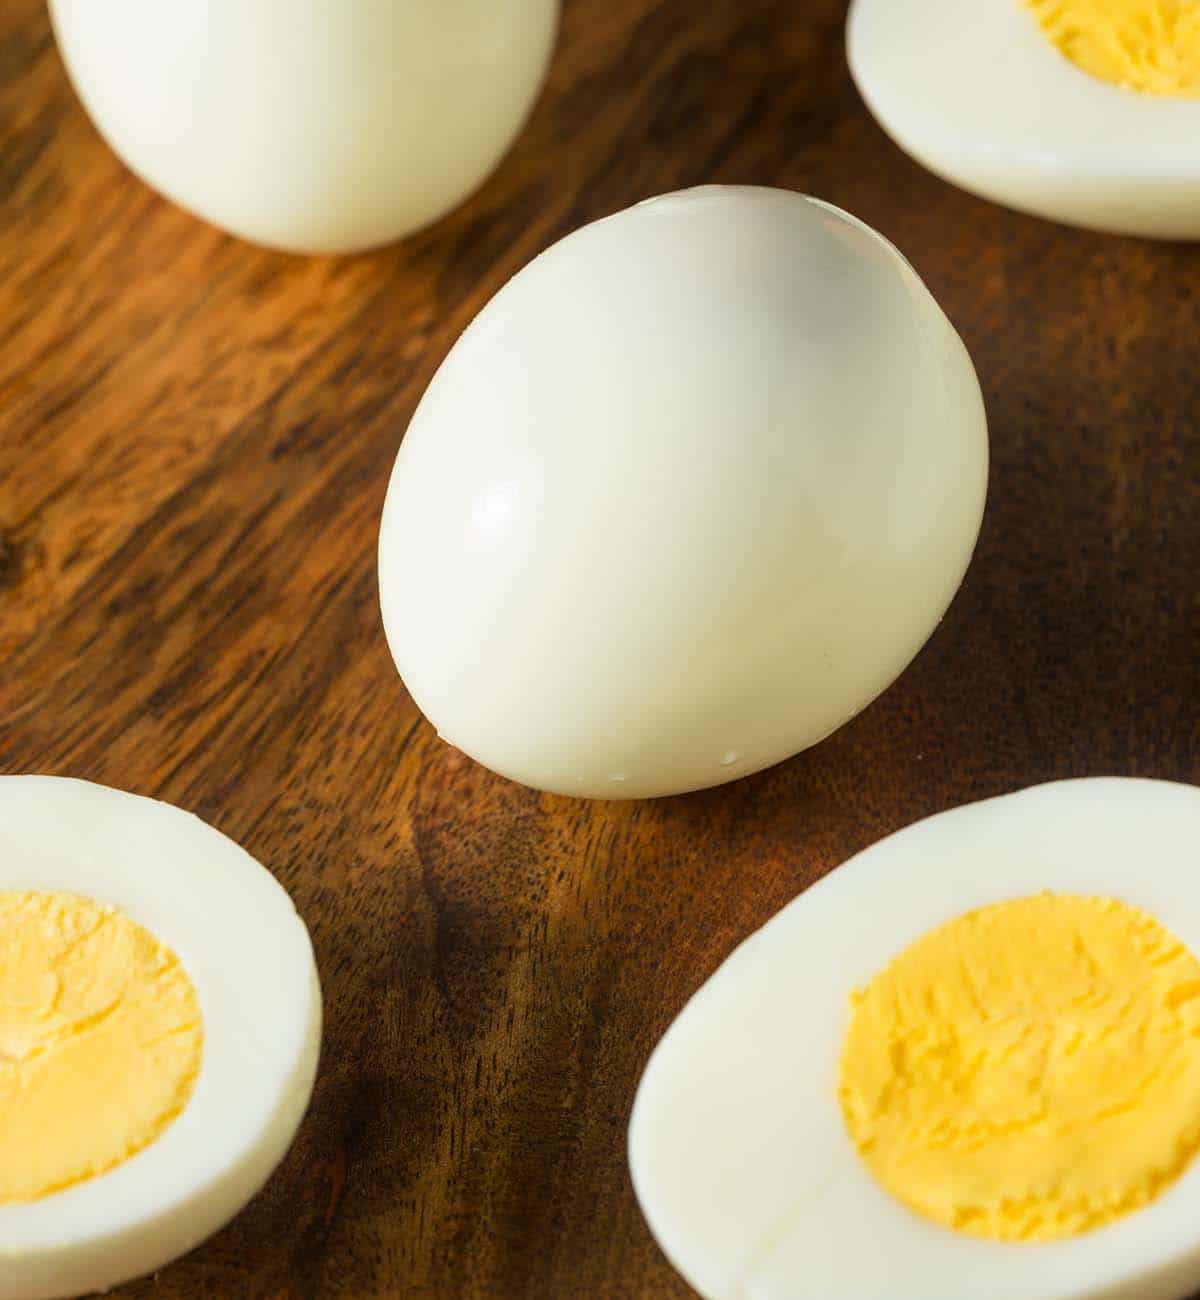 There is no problem with re-boiling the eggs if they have been undercooked the first time around.